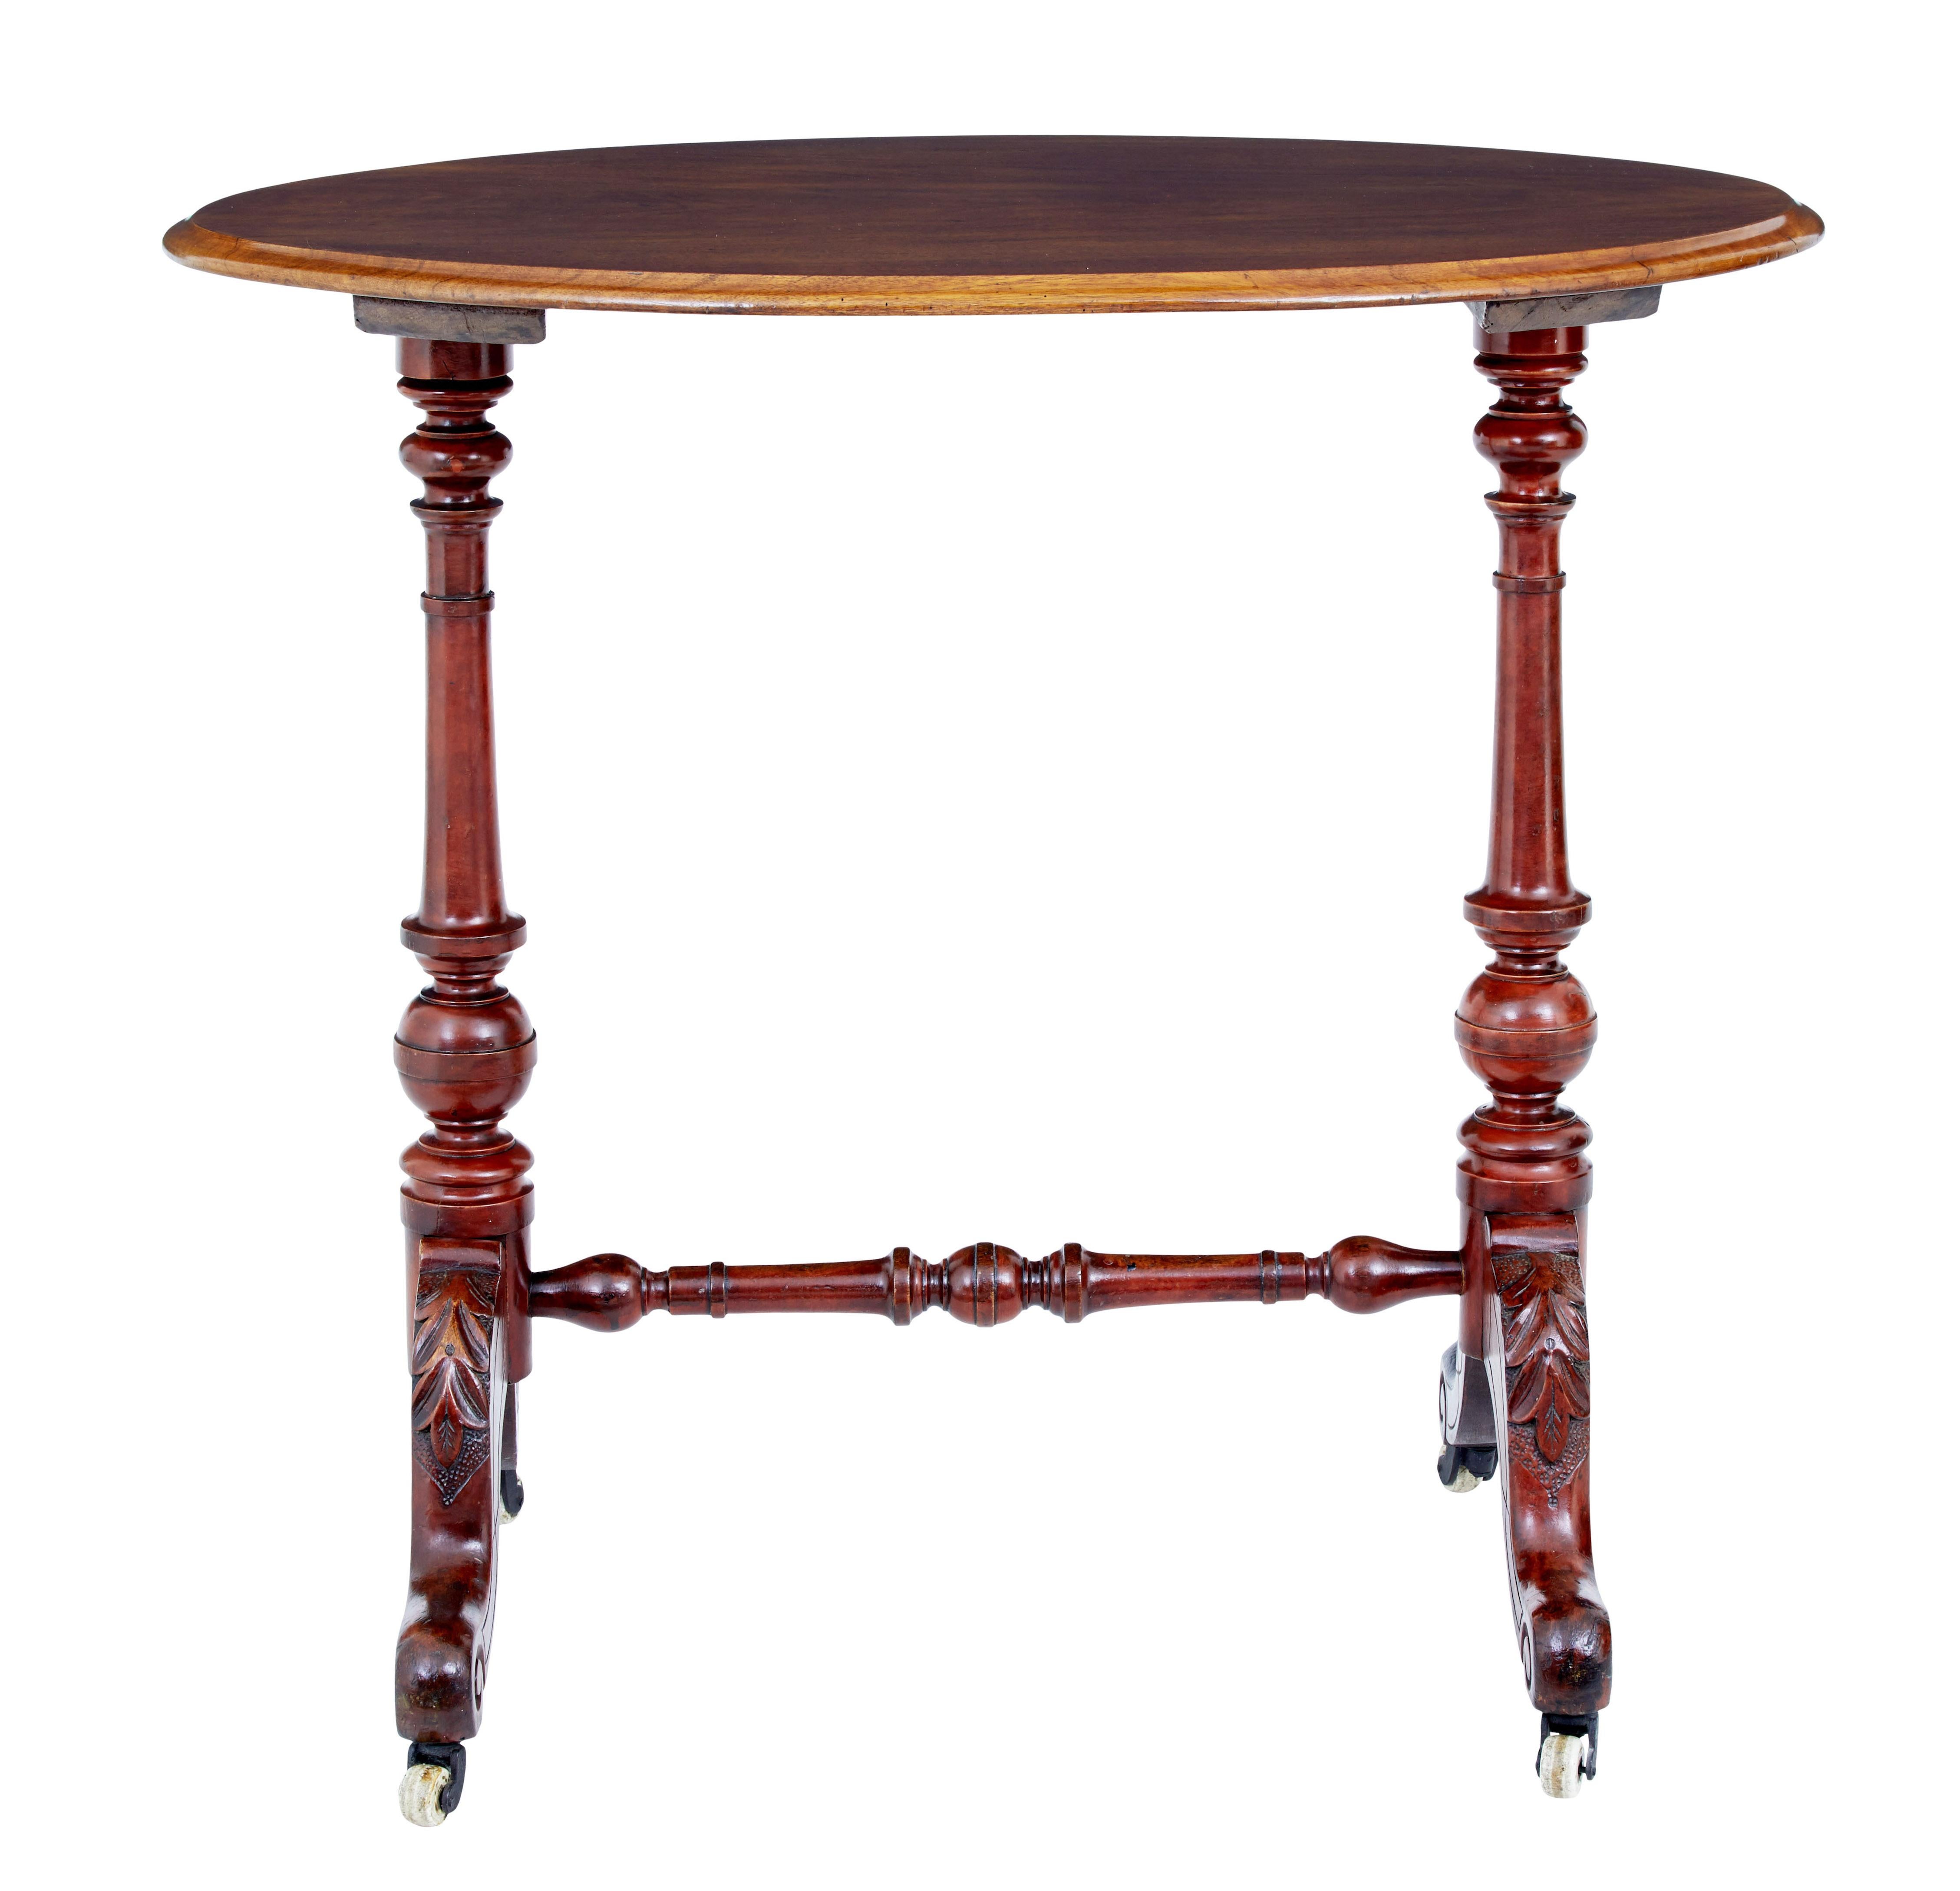 Functional piece of Victorian furniture circa 1870.

Oval walnut top, on a typical Victorian turned base with scrolling feet and carved acanthus leaf detail.  Standing on ceramic castors.

Base with evidence of being stained.  Minor surface